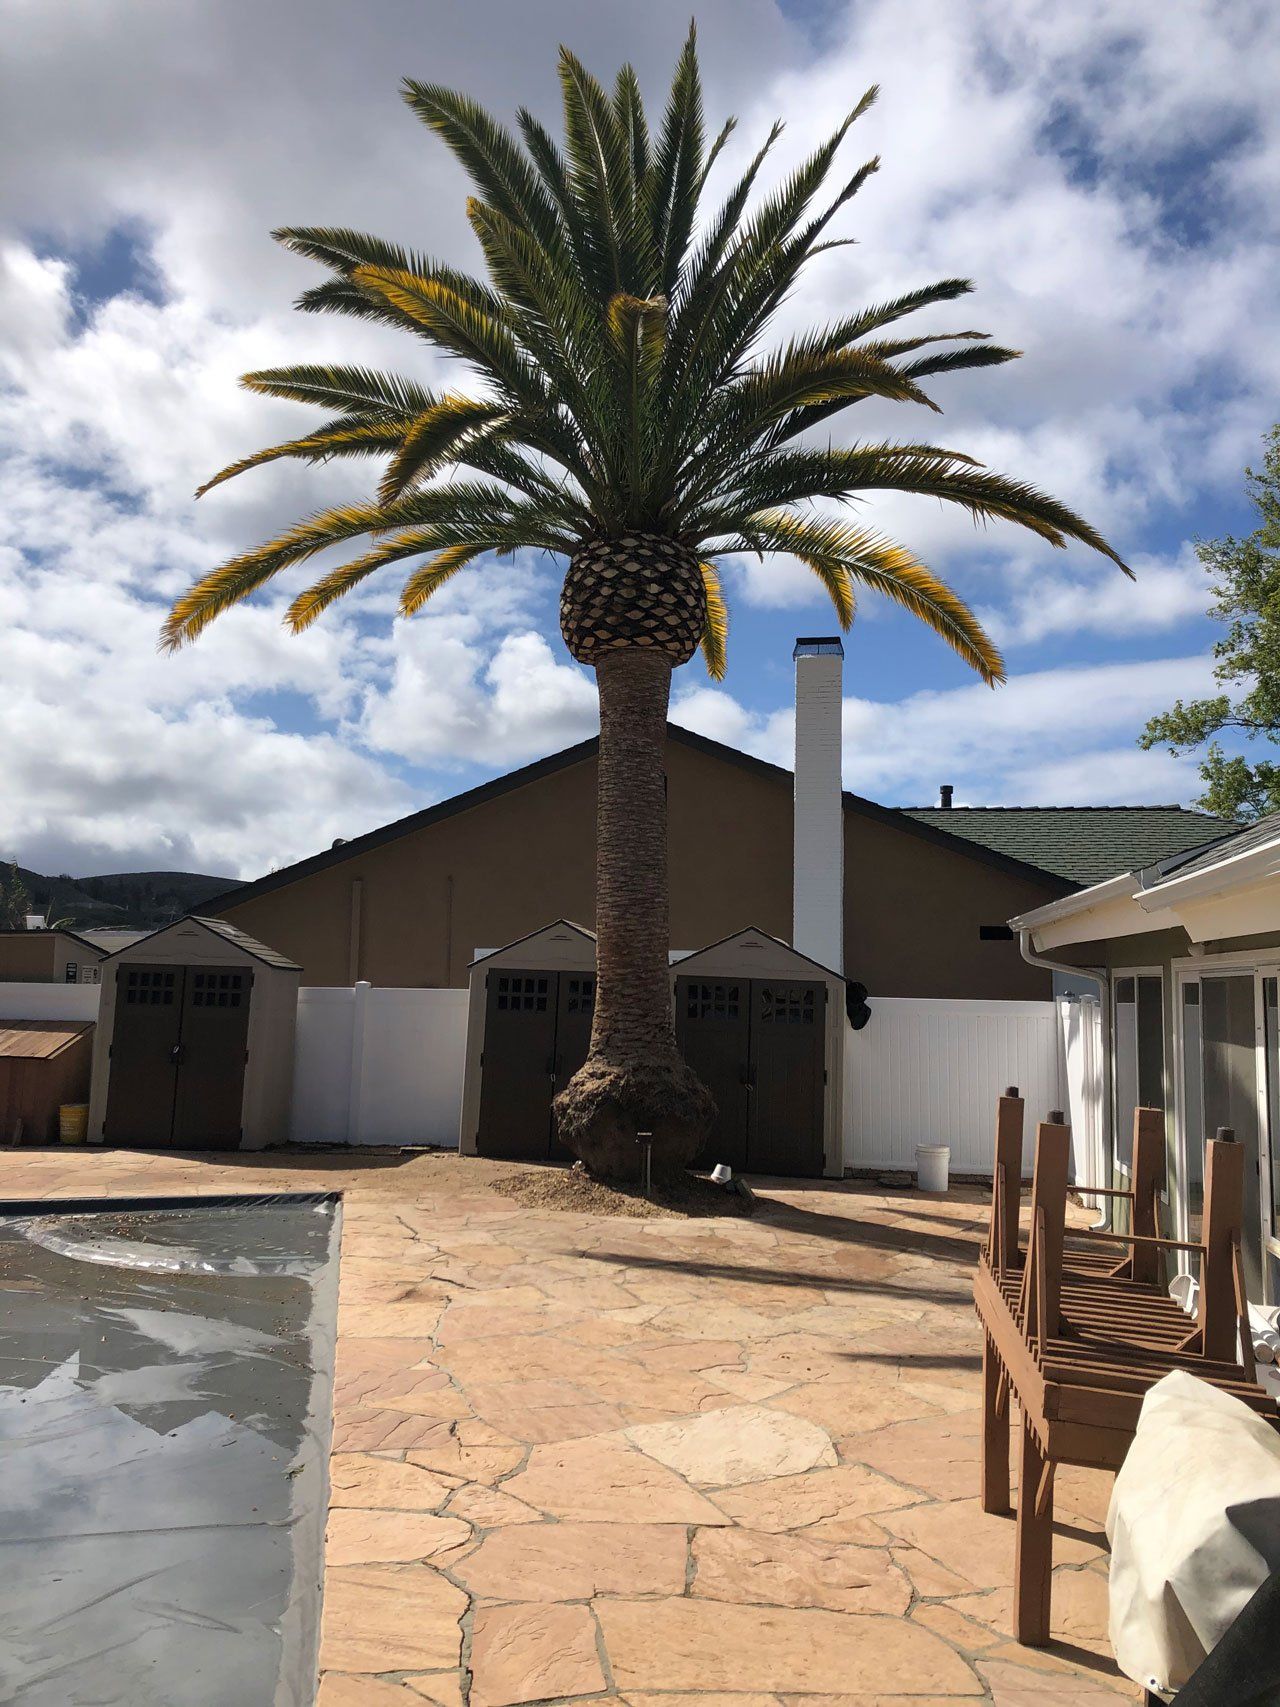 Conejo Valley Tree After — About Our Company in Thousand Oaks, CA